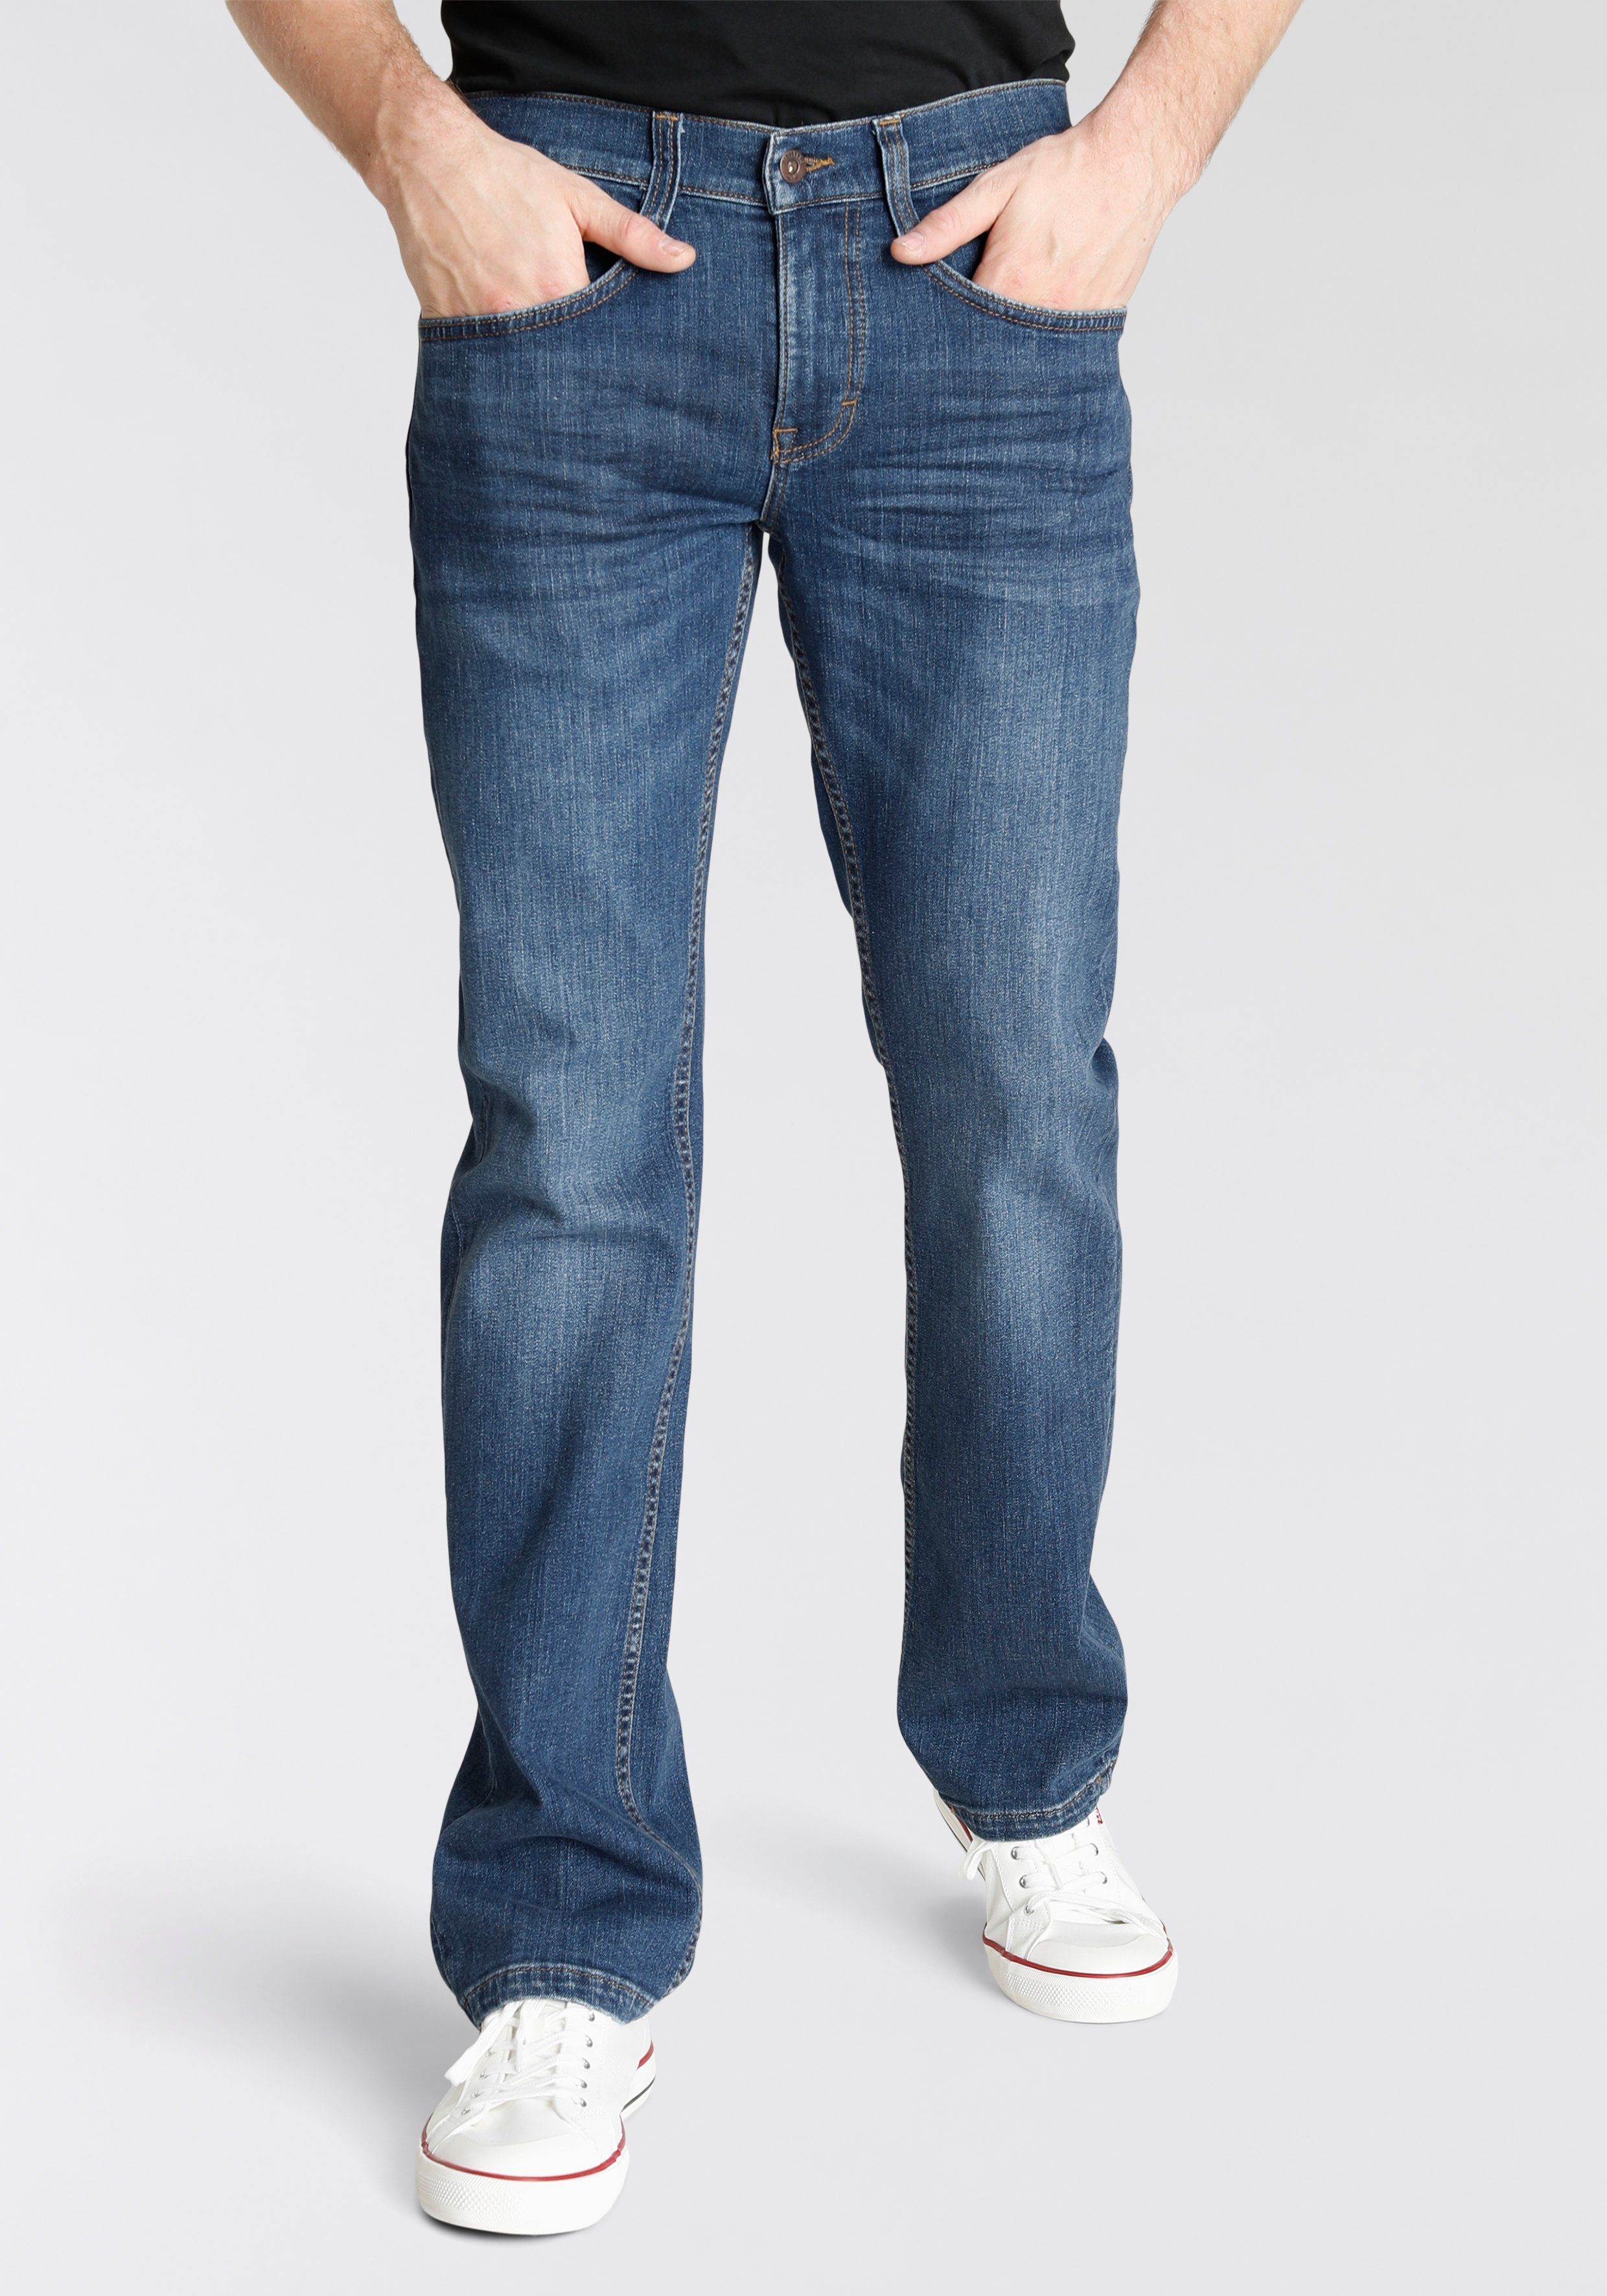 MUSTANG Bootcut-Jeans STYLE OREGON BOOTCUT dark blue wash